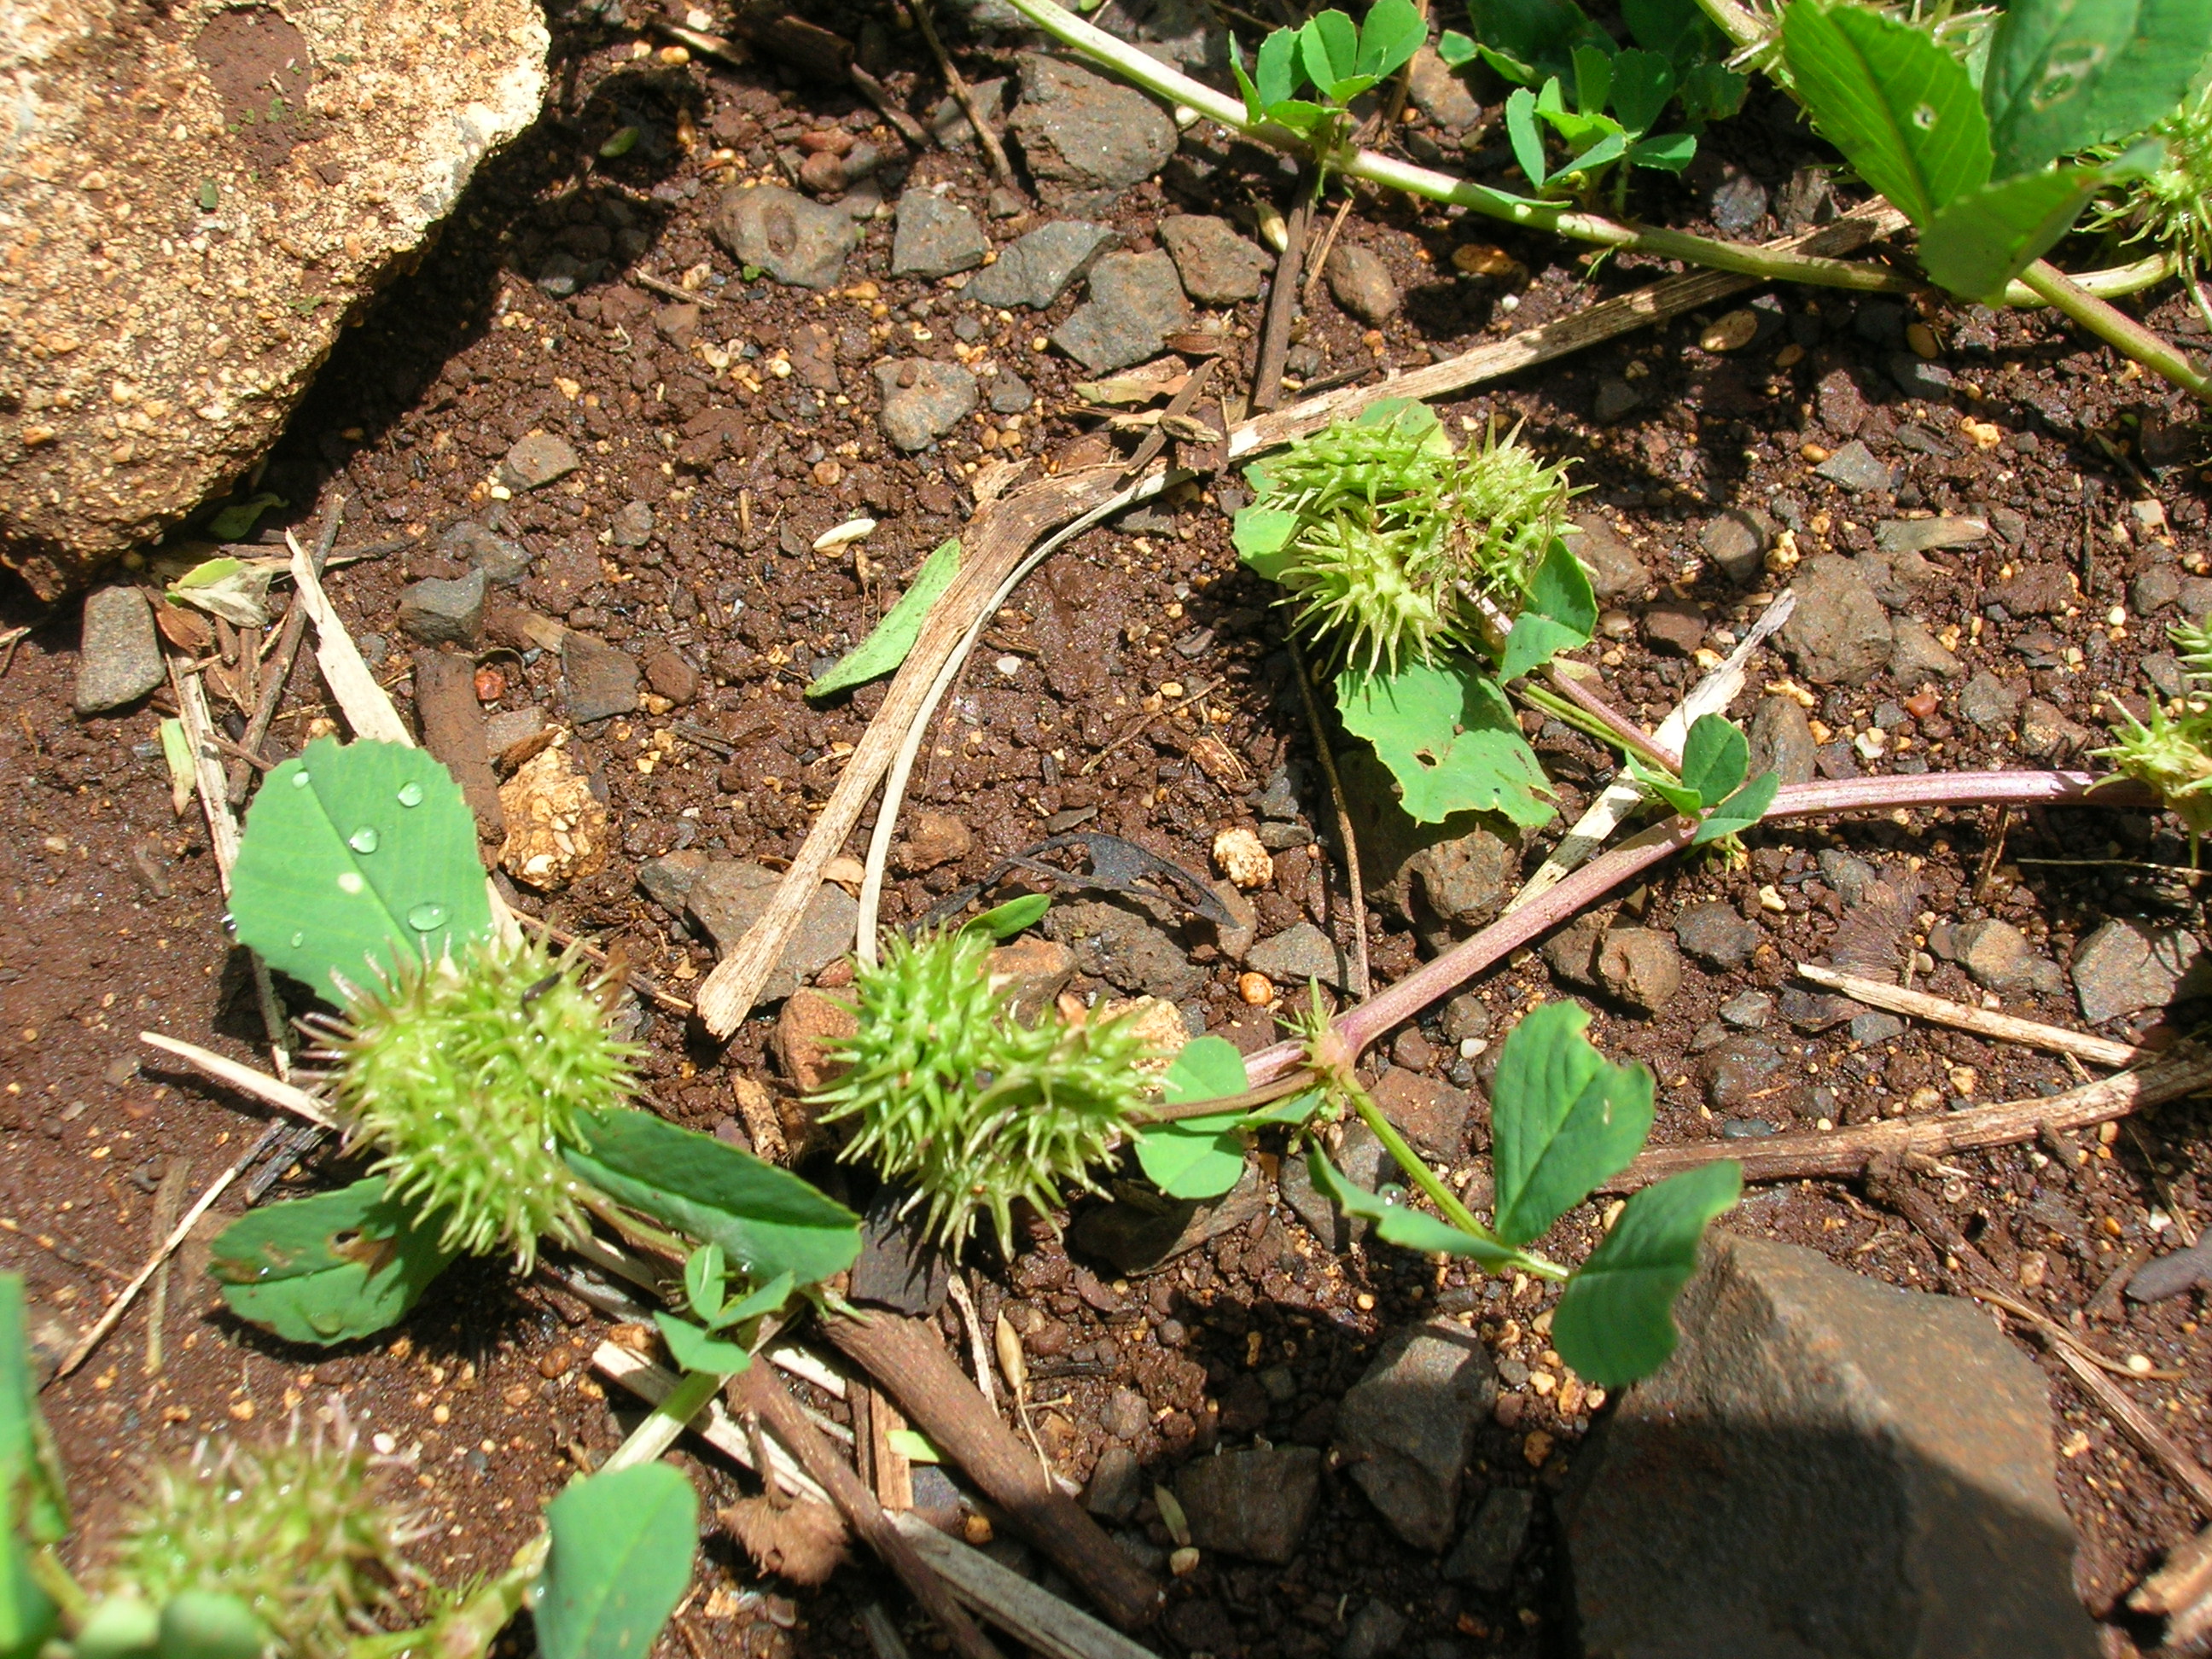 Green burs and leaves